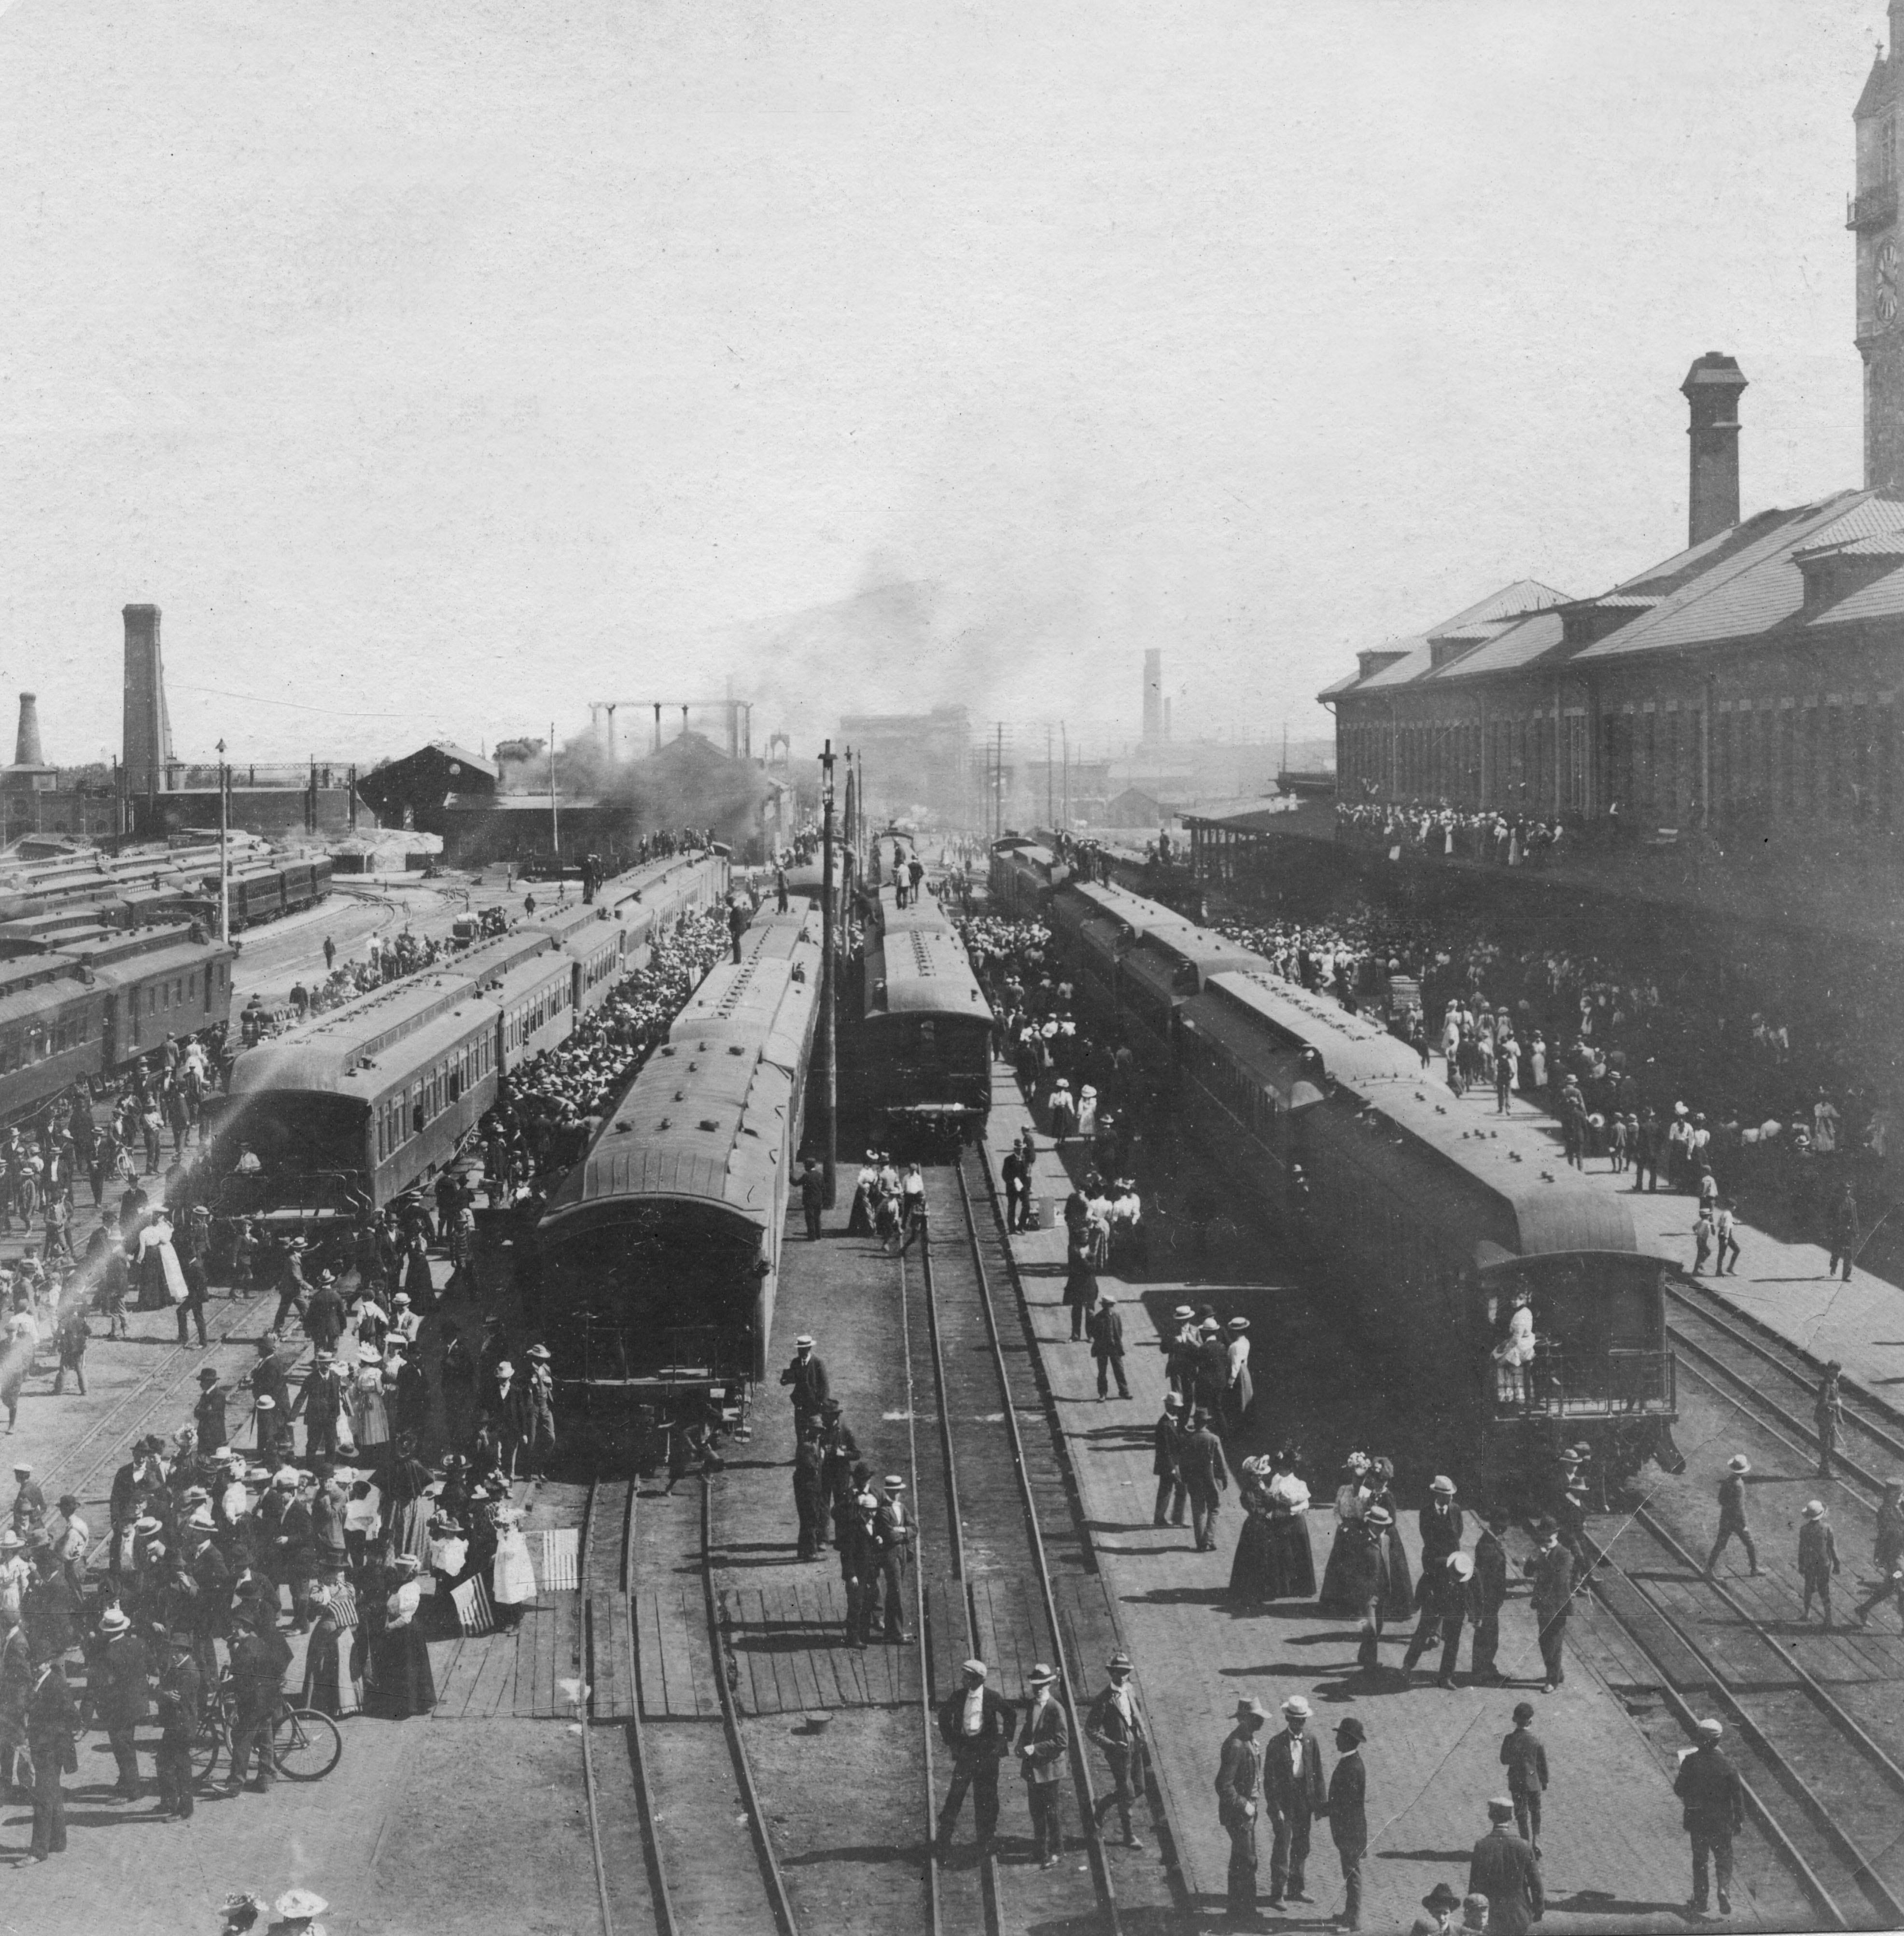 Photo of several trains stopped along several lines of train tracks. Crowds of people, most wearing brimmed hats and either suits or skirts, are gathered around the trains to board. A few people are pushing bicycles. At the end of the tracks, black puffs of smoke can be seen rising in the air. The long train depot building is on the right of the photo.